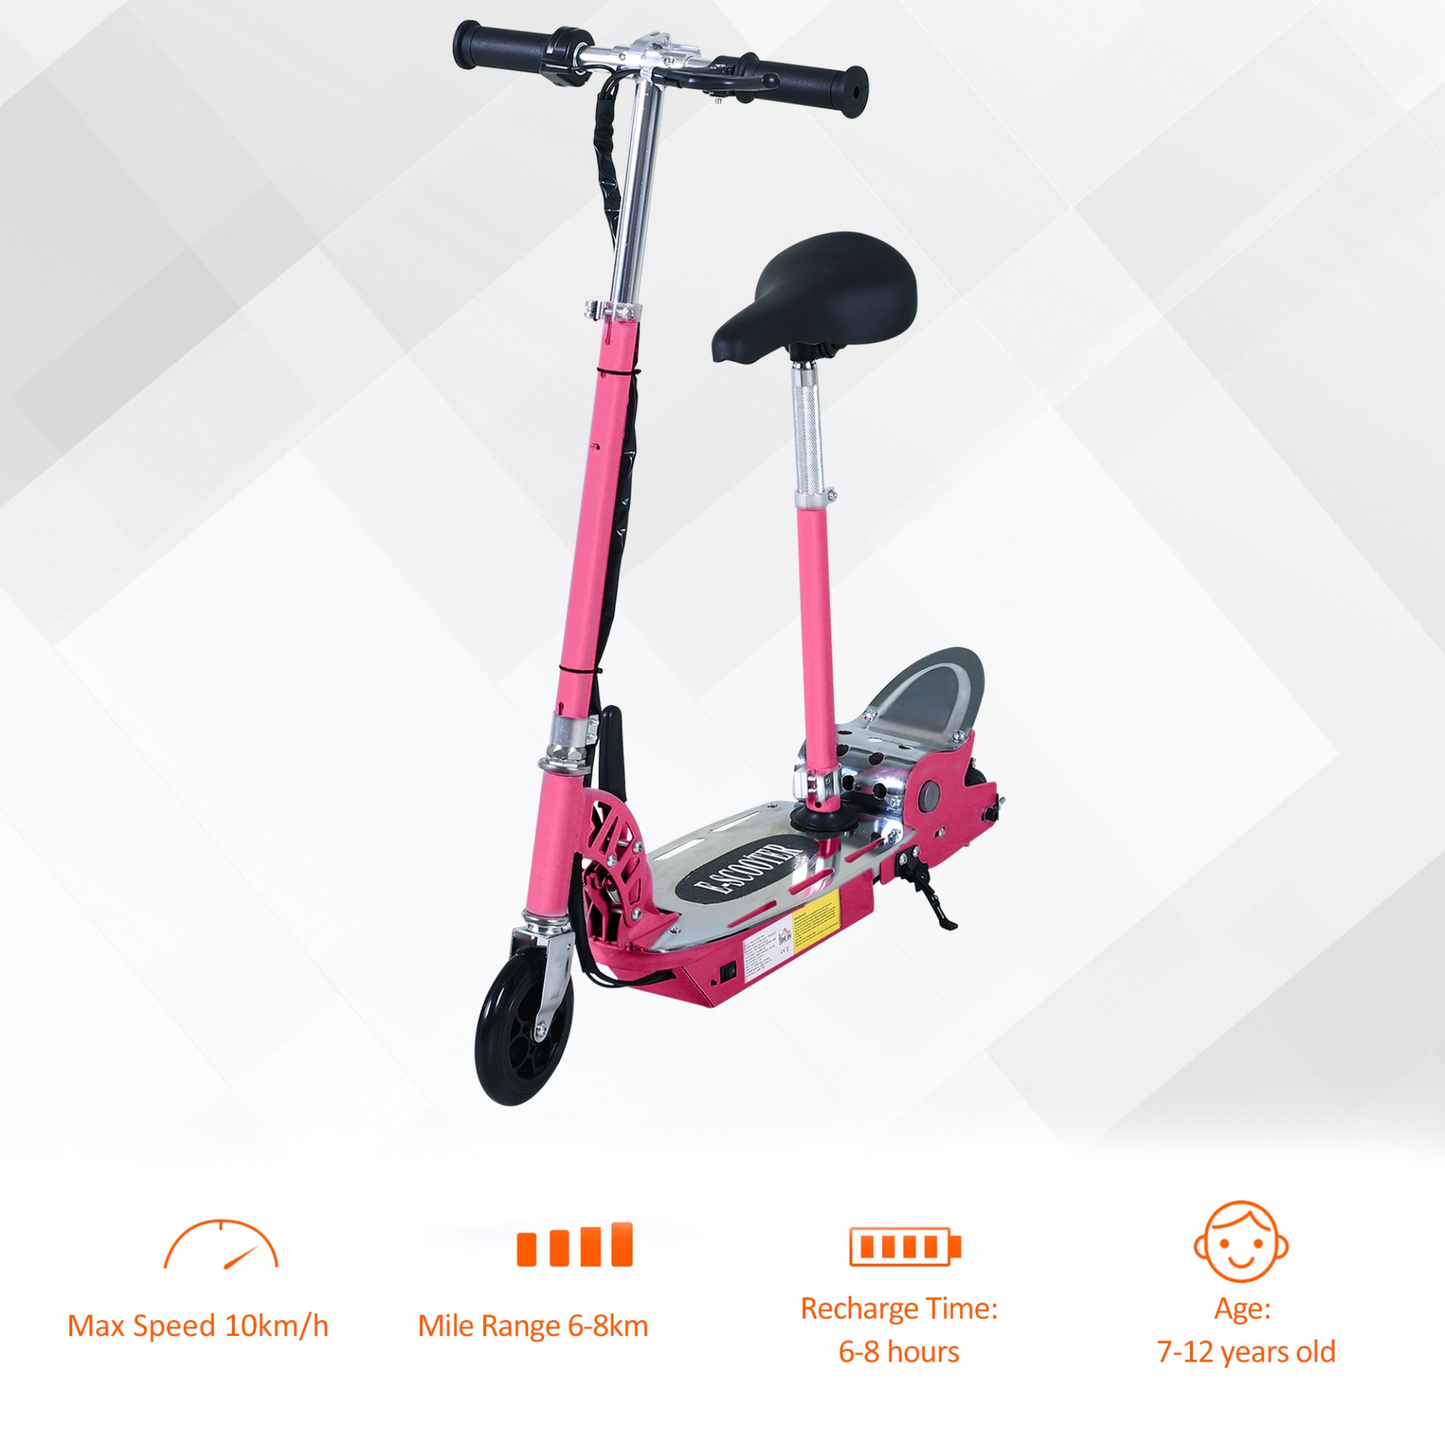 HOMCOM 120W Teens Foldable Kids Powered Scooters 24V Rechargeable Battery Adjustable Ride on Outdoor Toy (Pink)